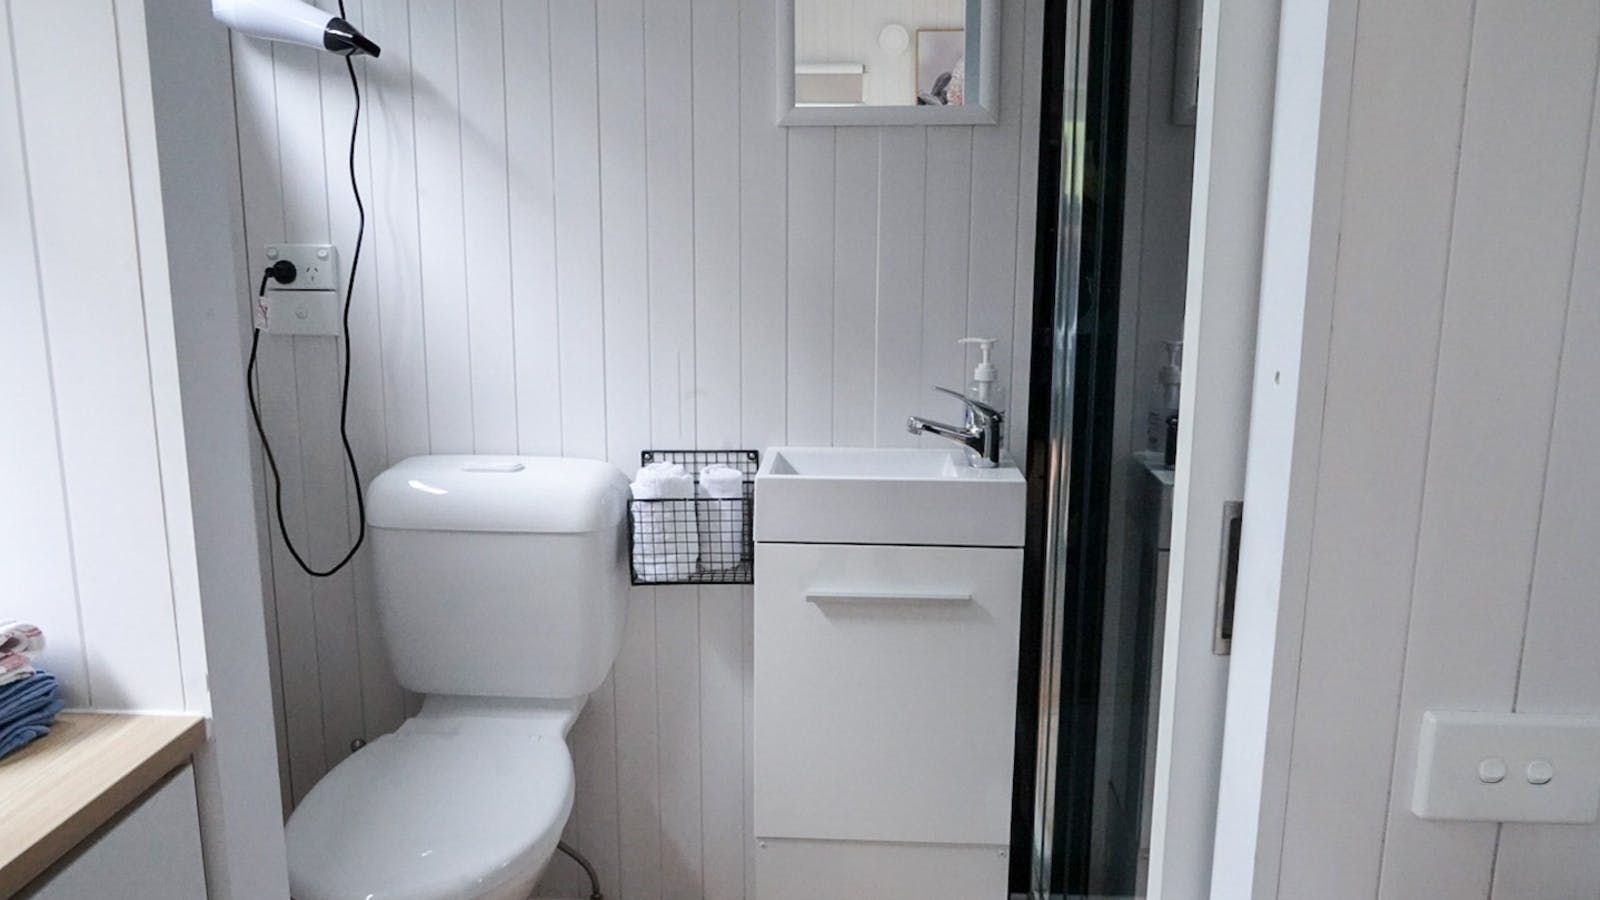 A comfortably-sized, sustainable bathroom with hot water system